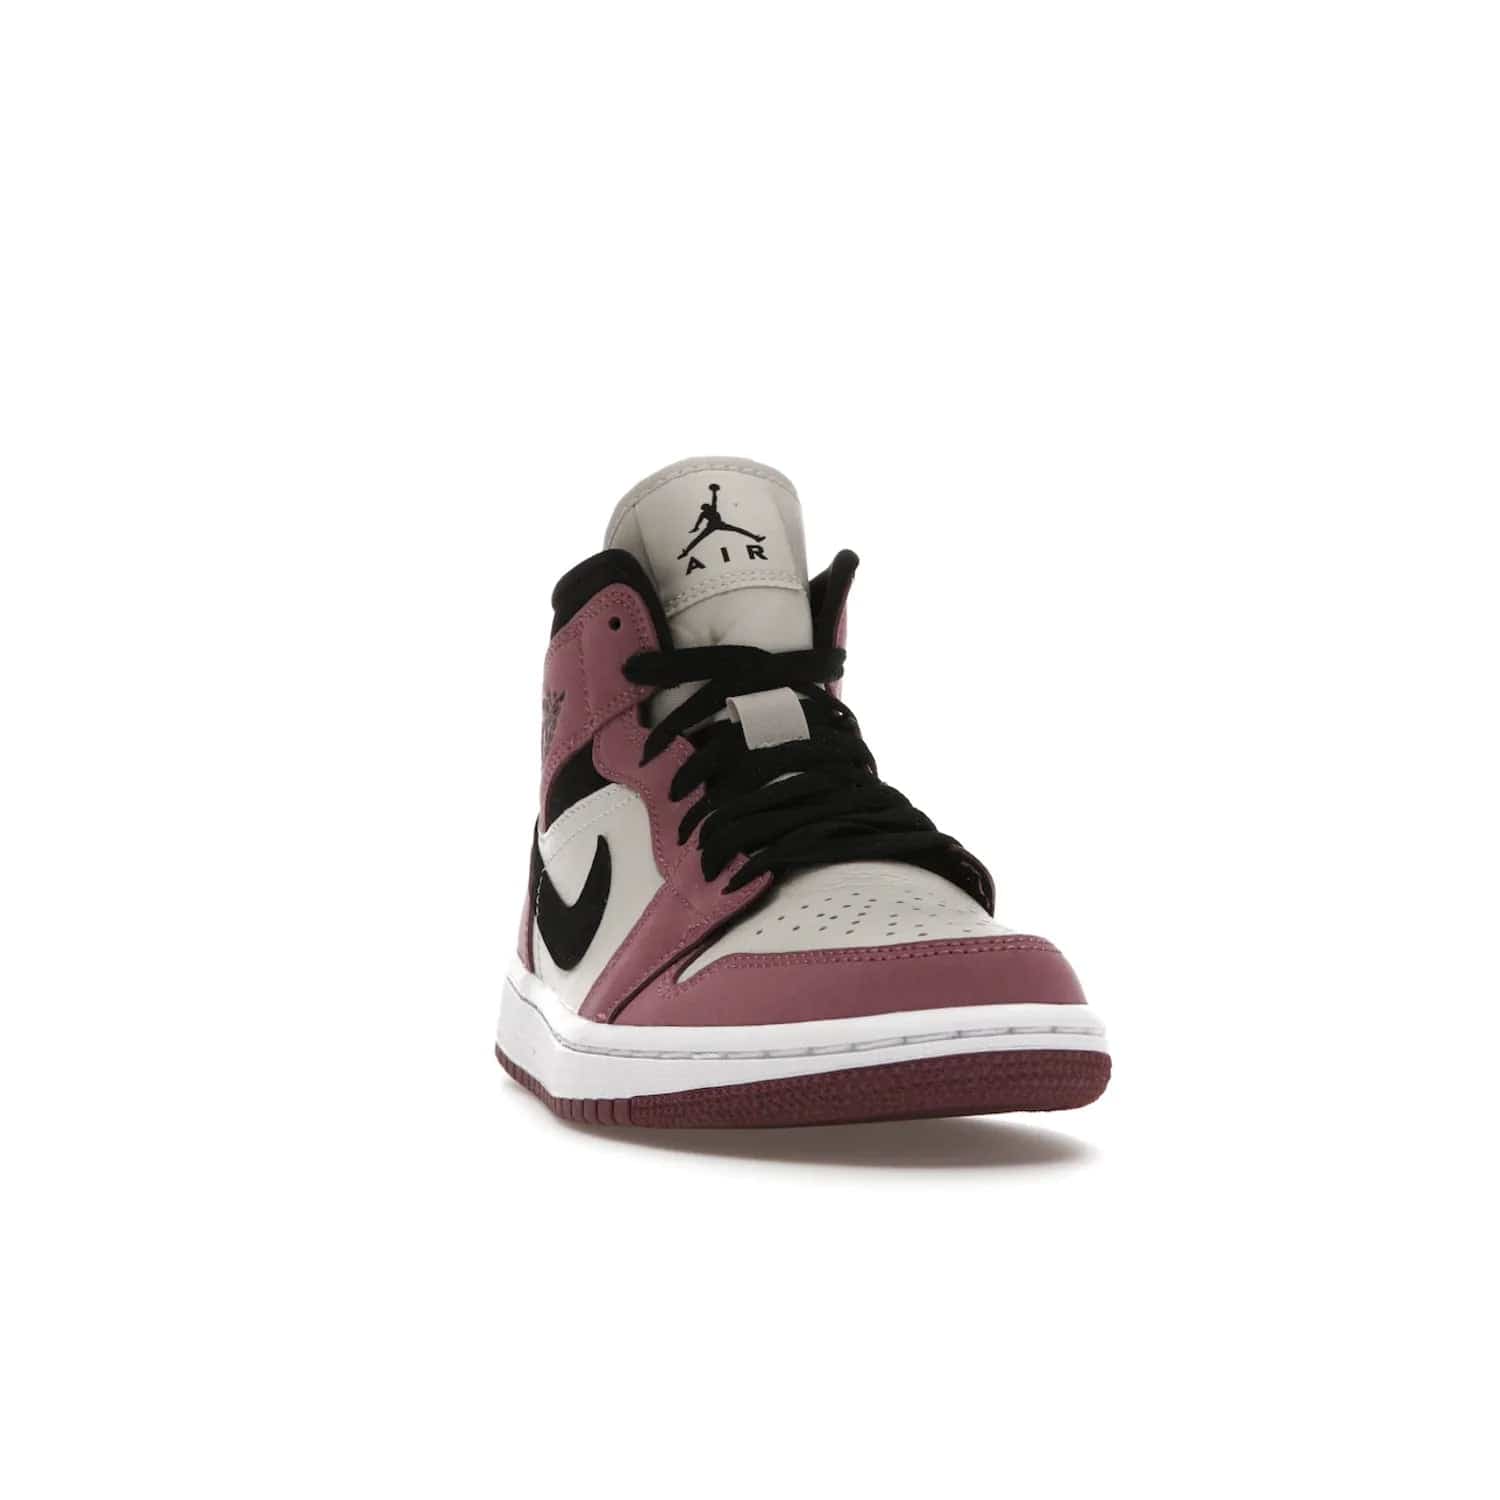 Jordan 1 Mid SE Light Mulberry (Women's) - Image 8 - Only at www.BallersClubKickz.com - Classic style meets performance with the Air Jordan 1 Mid Light Mulberry (Women's). Sleek leather overlays and light bone detailing bring out the best of this classic sneaker, perfect for the active woman on-the-go. Available March 2022.